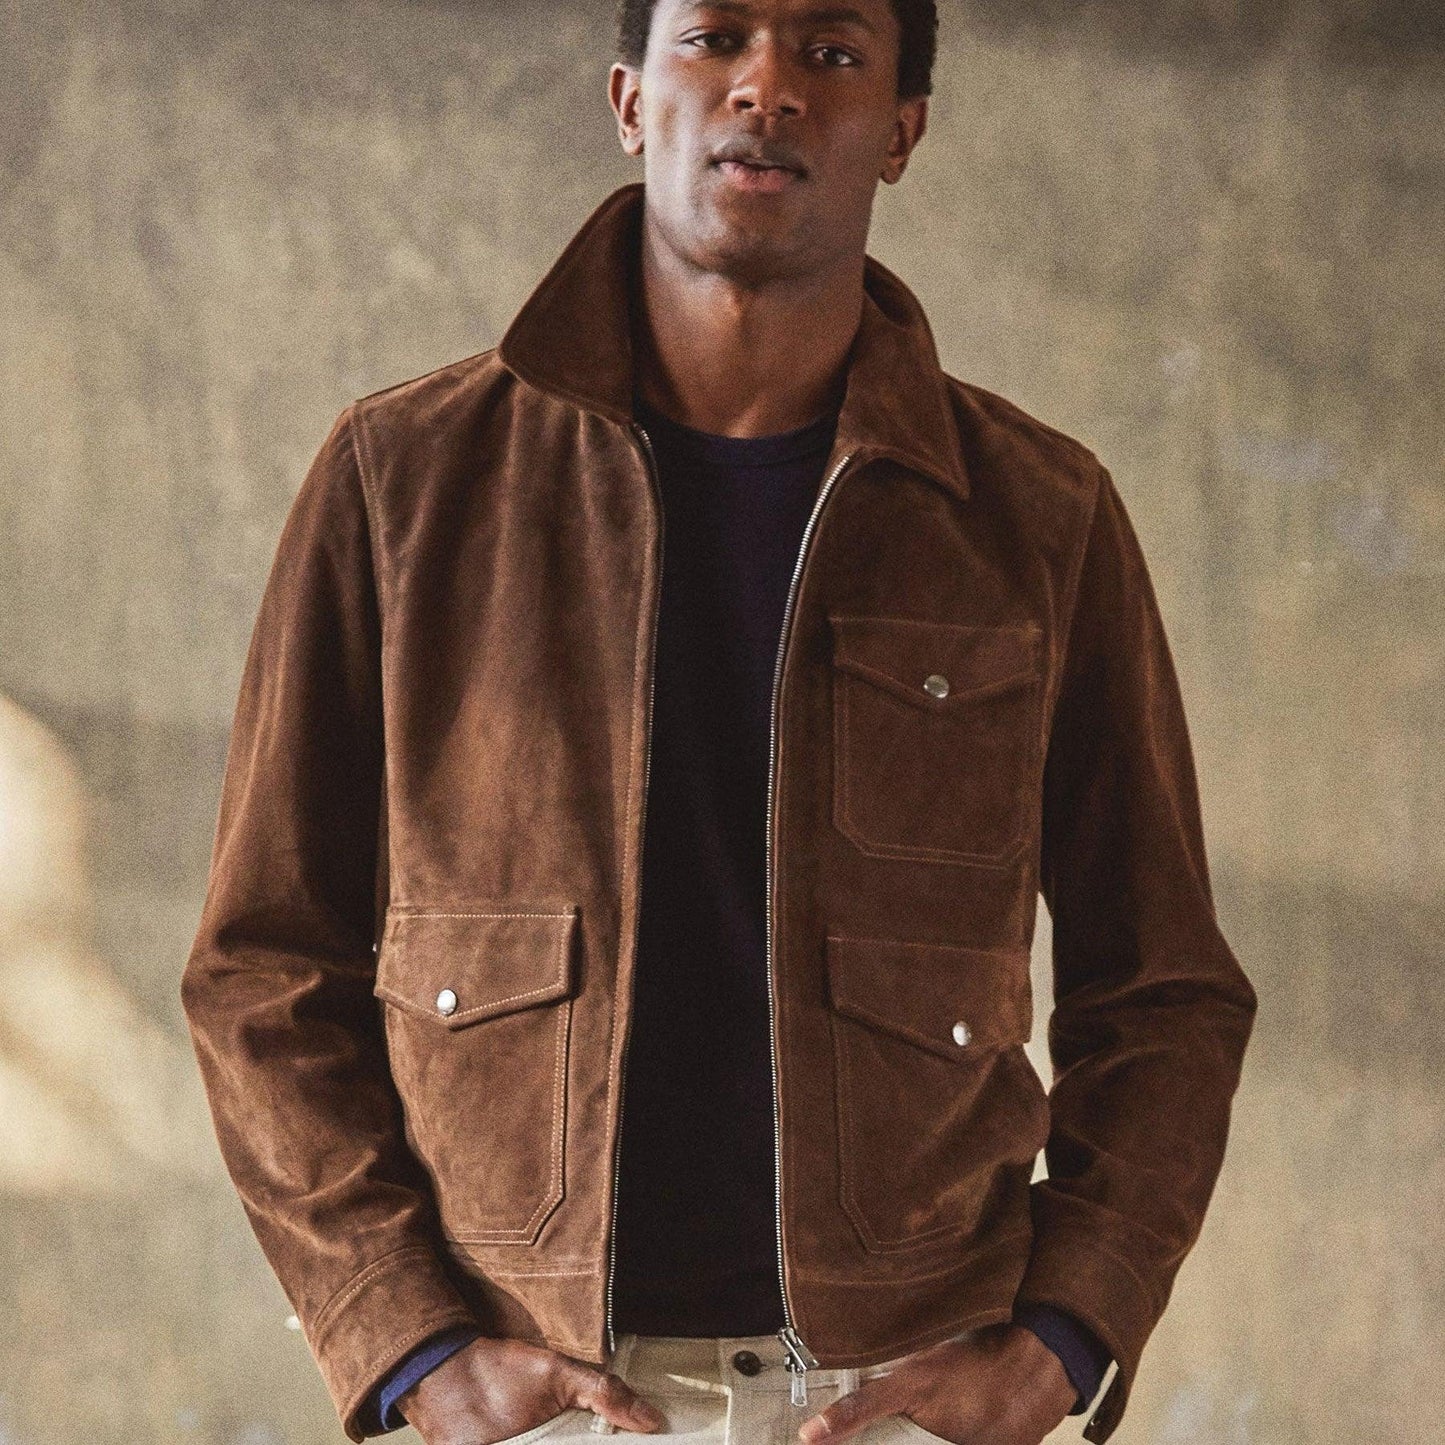 MEN'S TAN BROWN SUEDE GENUINE LEATHER BOMBER JACKET - Leather Loom